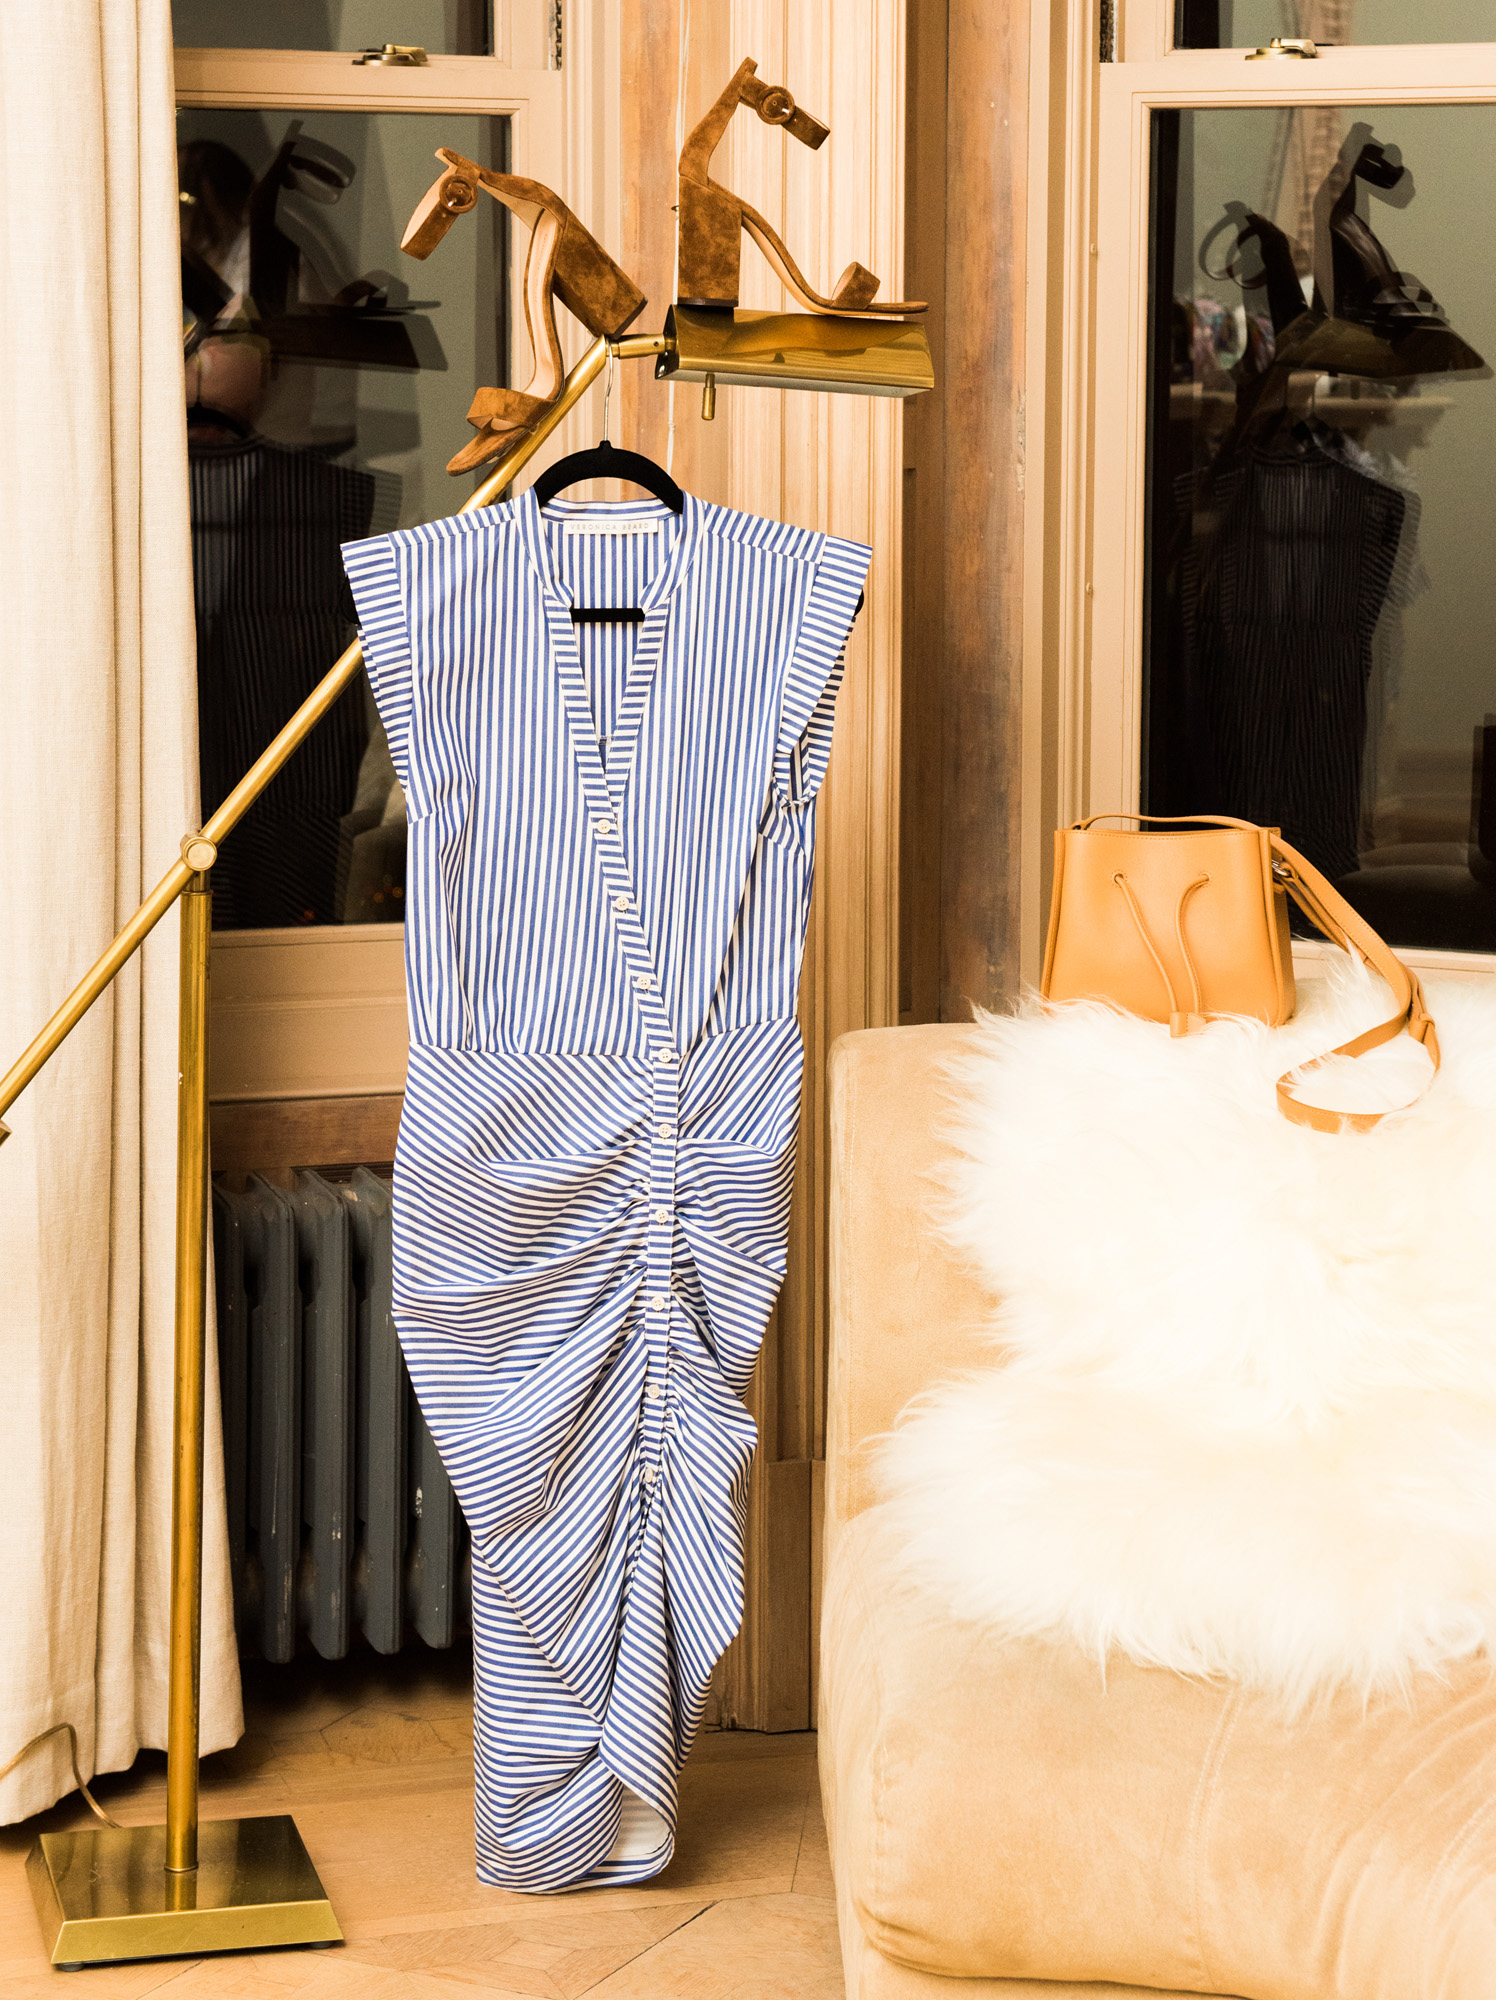 Our Guide to Styling Spring 2017’s Striped Shirt Trend - Coveteur